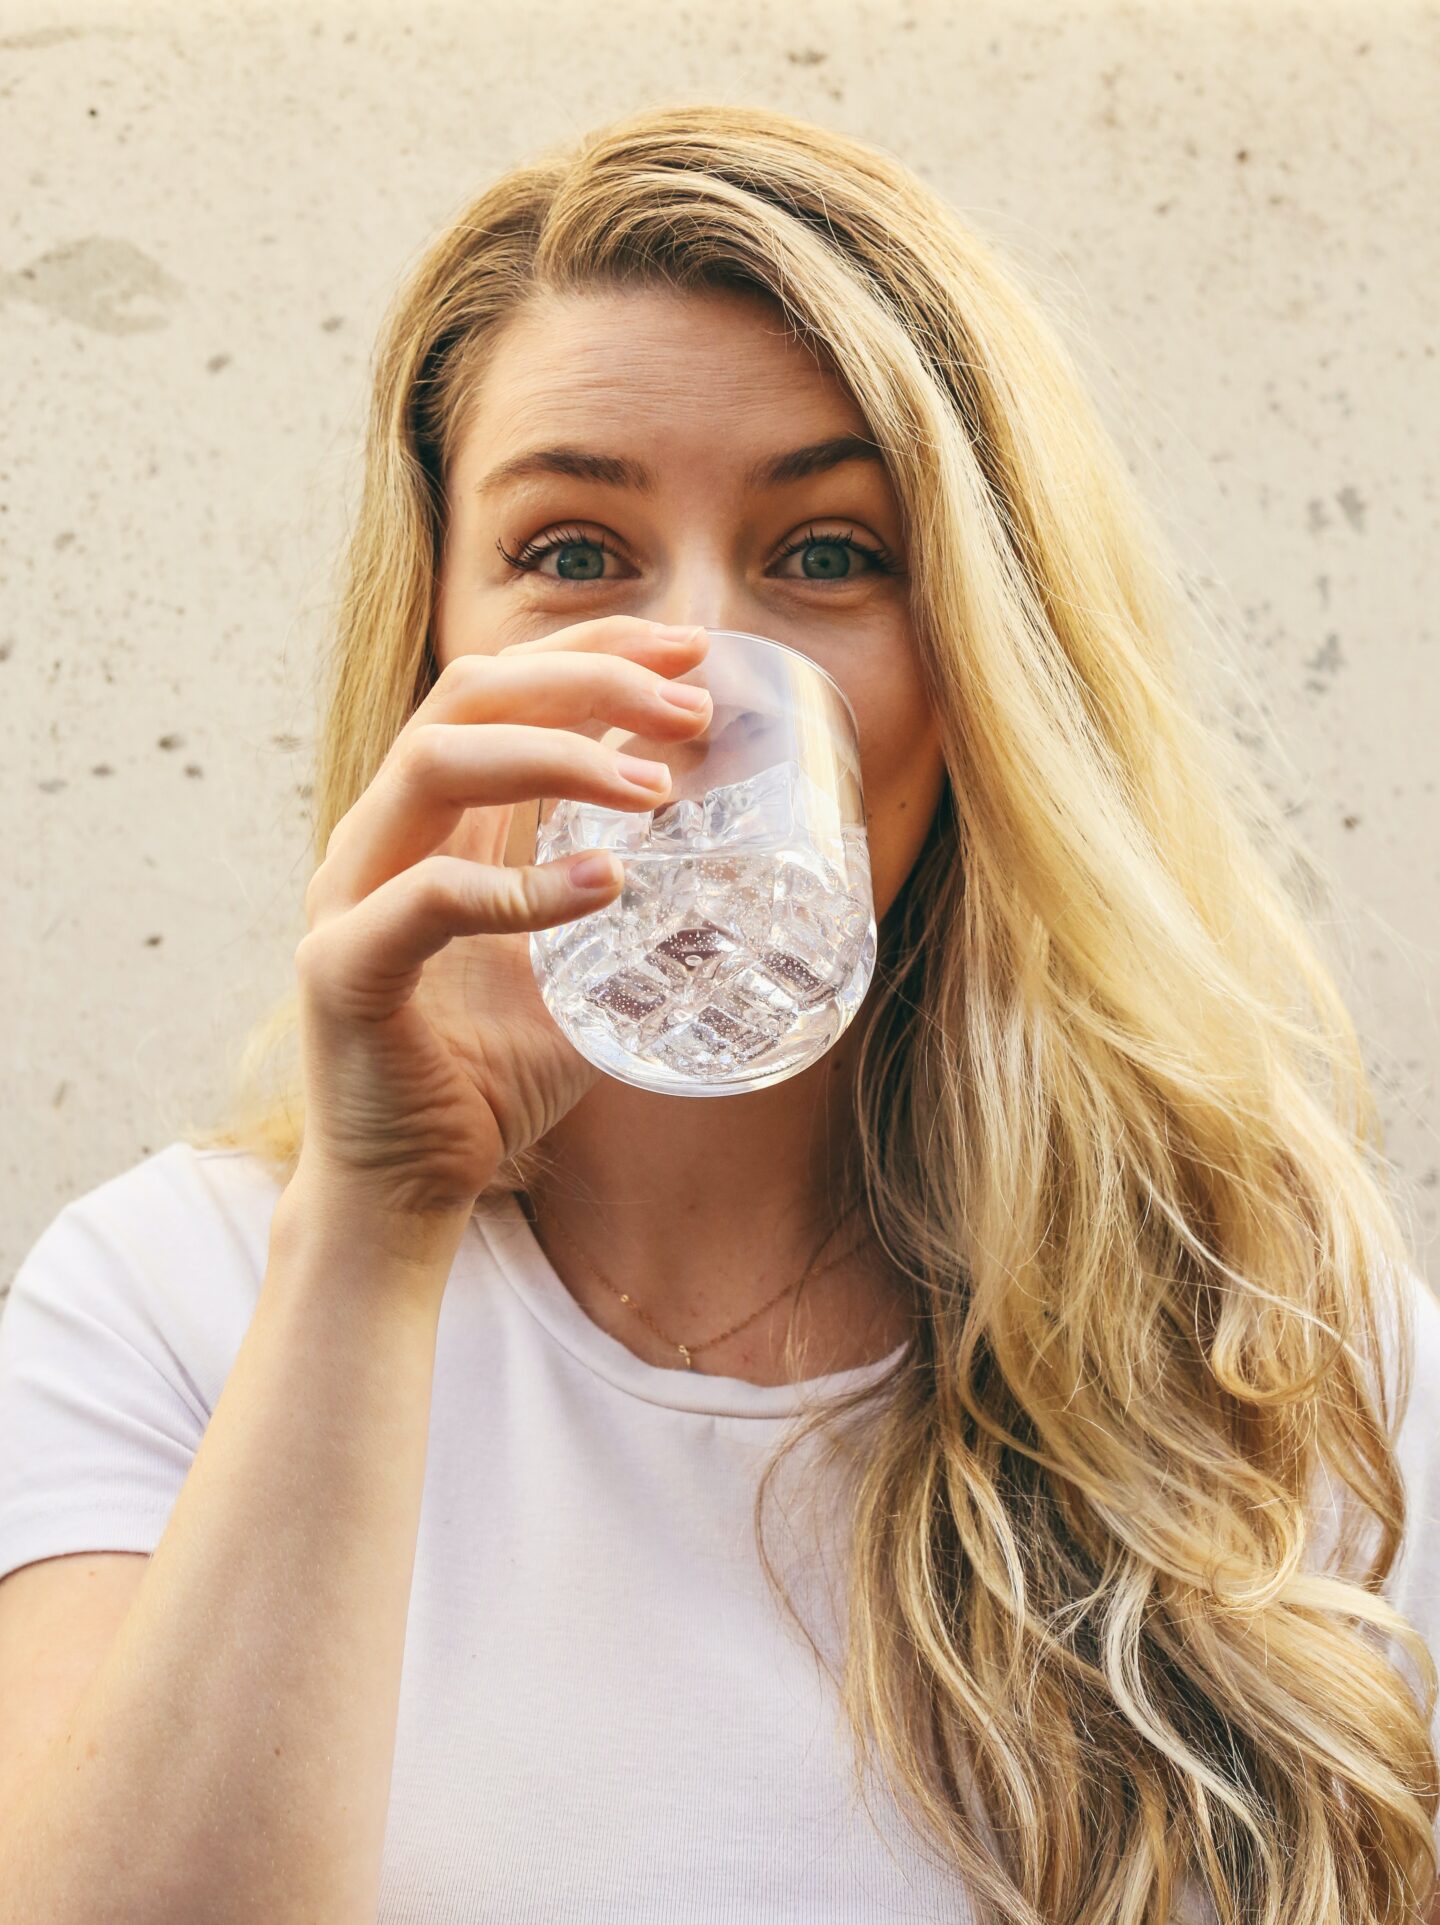 12 simple ways to drink more water every day. Happy woman drinking a glass of water